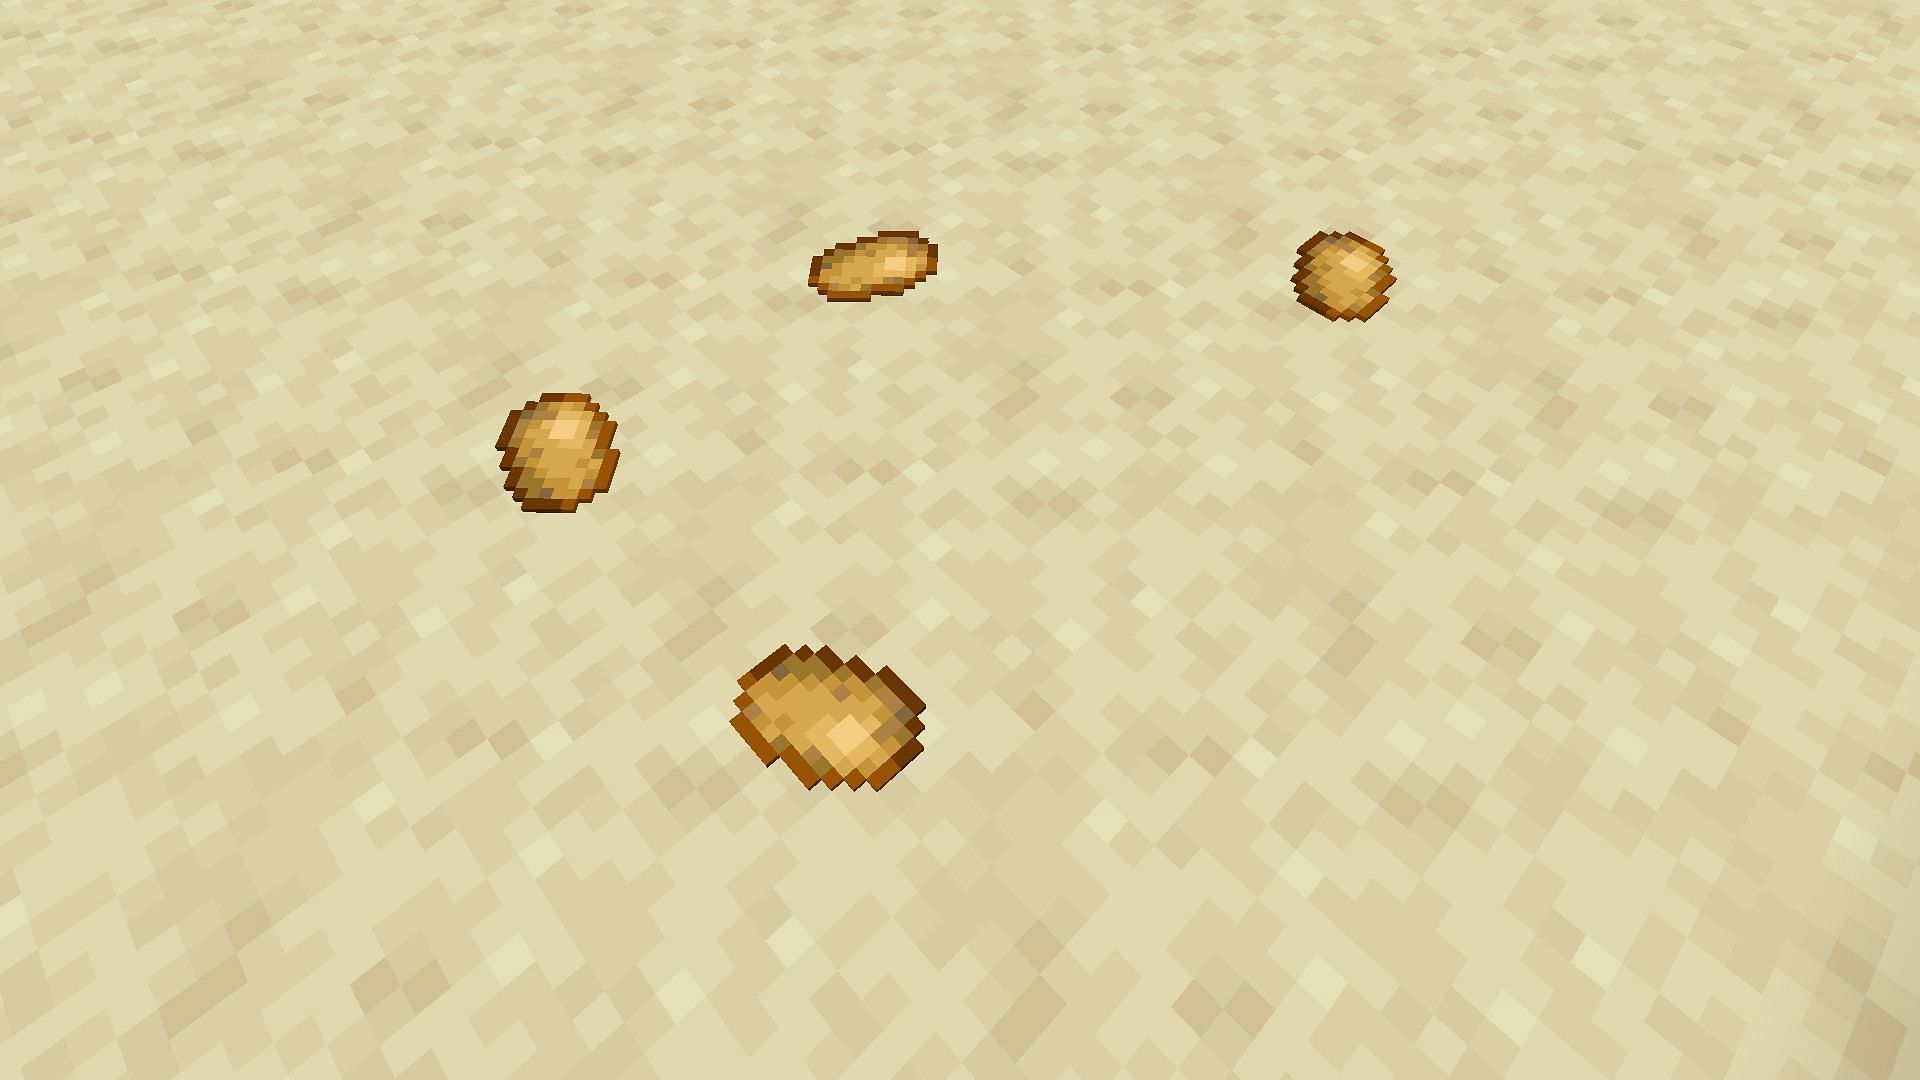 Potatoes can initially be obtained from villages (Image via Mojang)